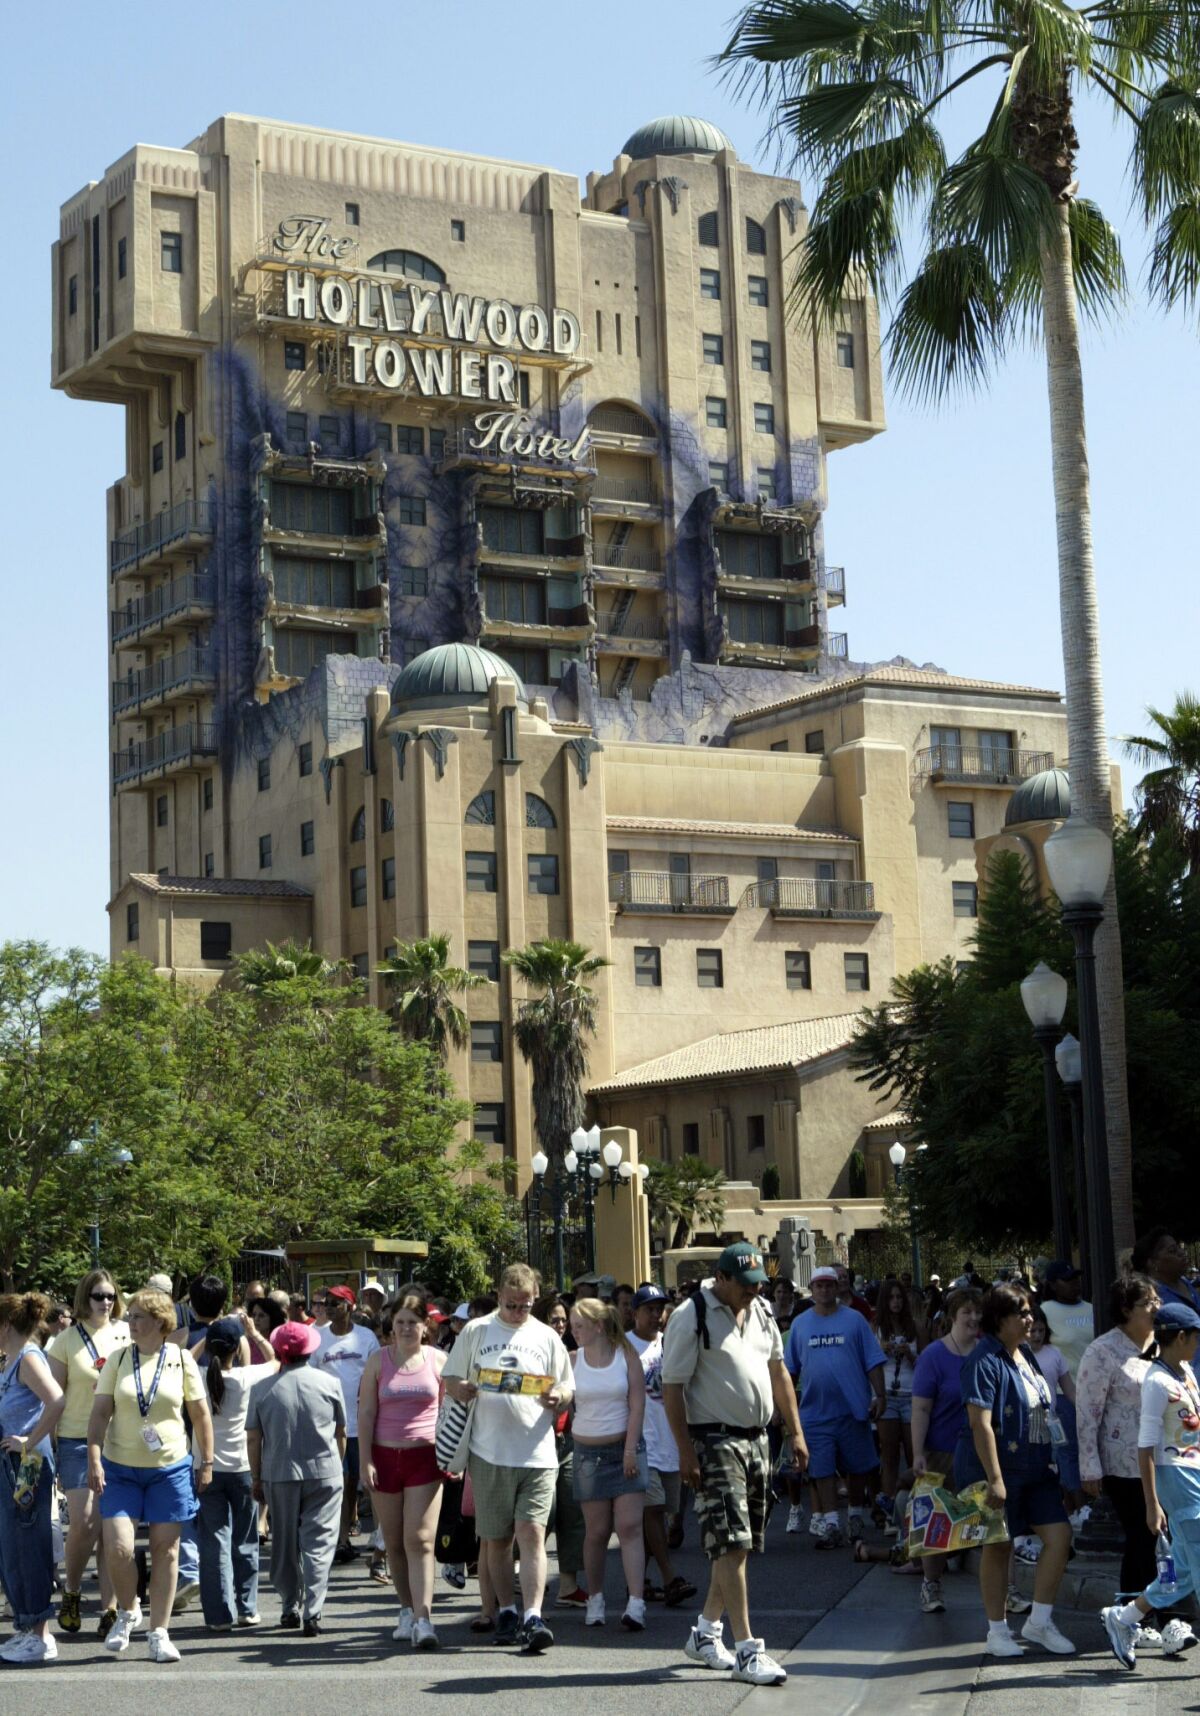 The Twilight Zone Tower of Terror at Disney California Adventure Park opened in 2004. It had 42 incidents of injury or ailment reported in 2007 through 2012. Source: California Department of Industrial Relations.